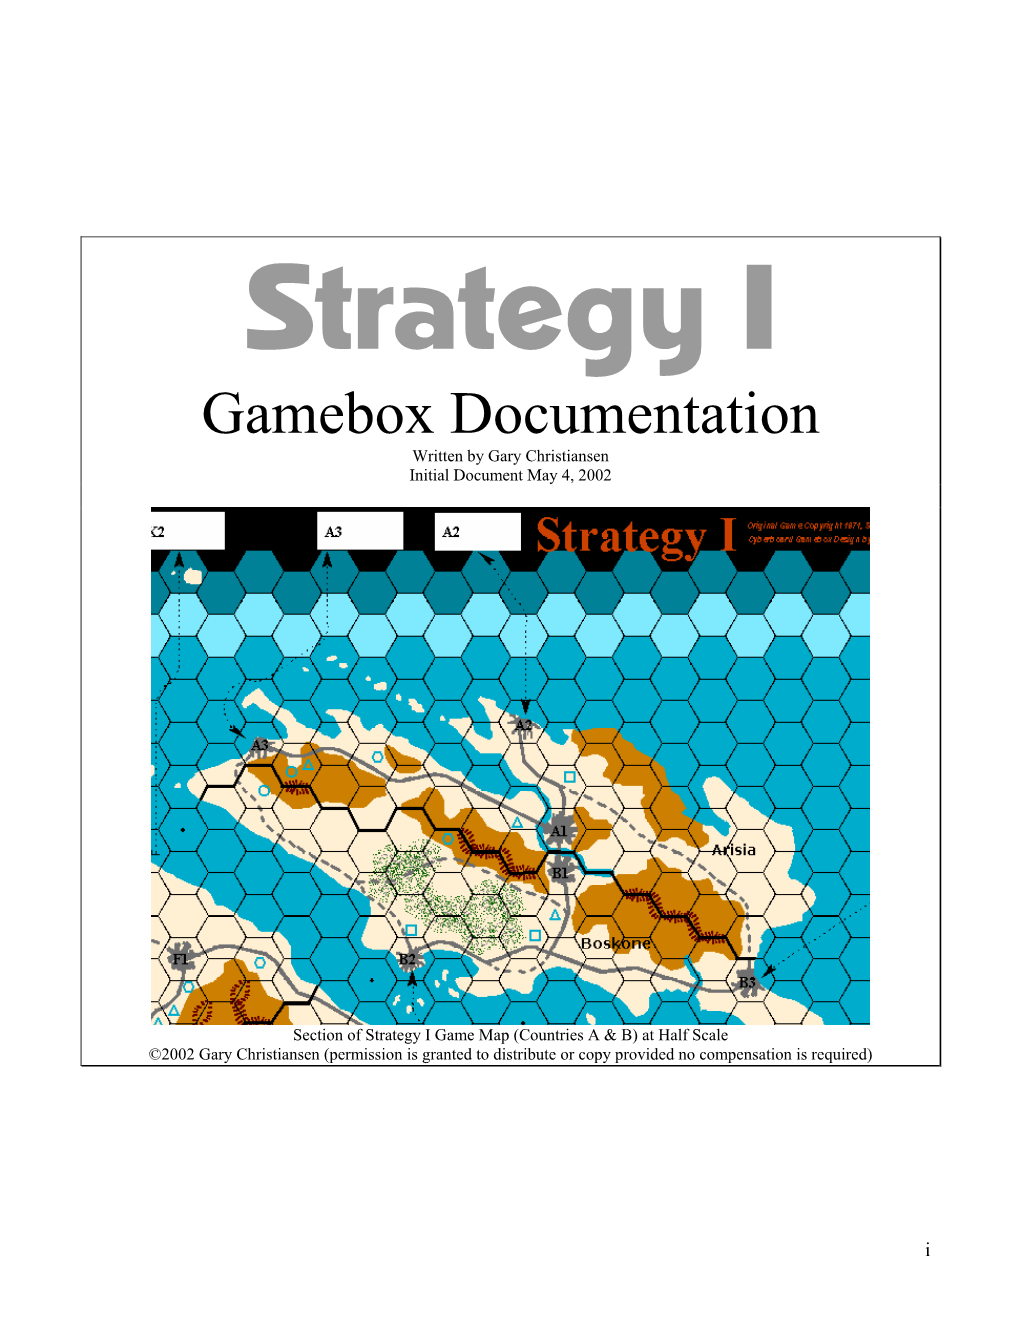 Creating the Strategy I Gamebox